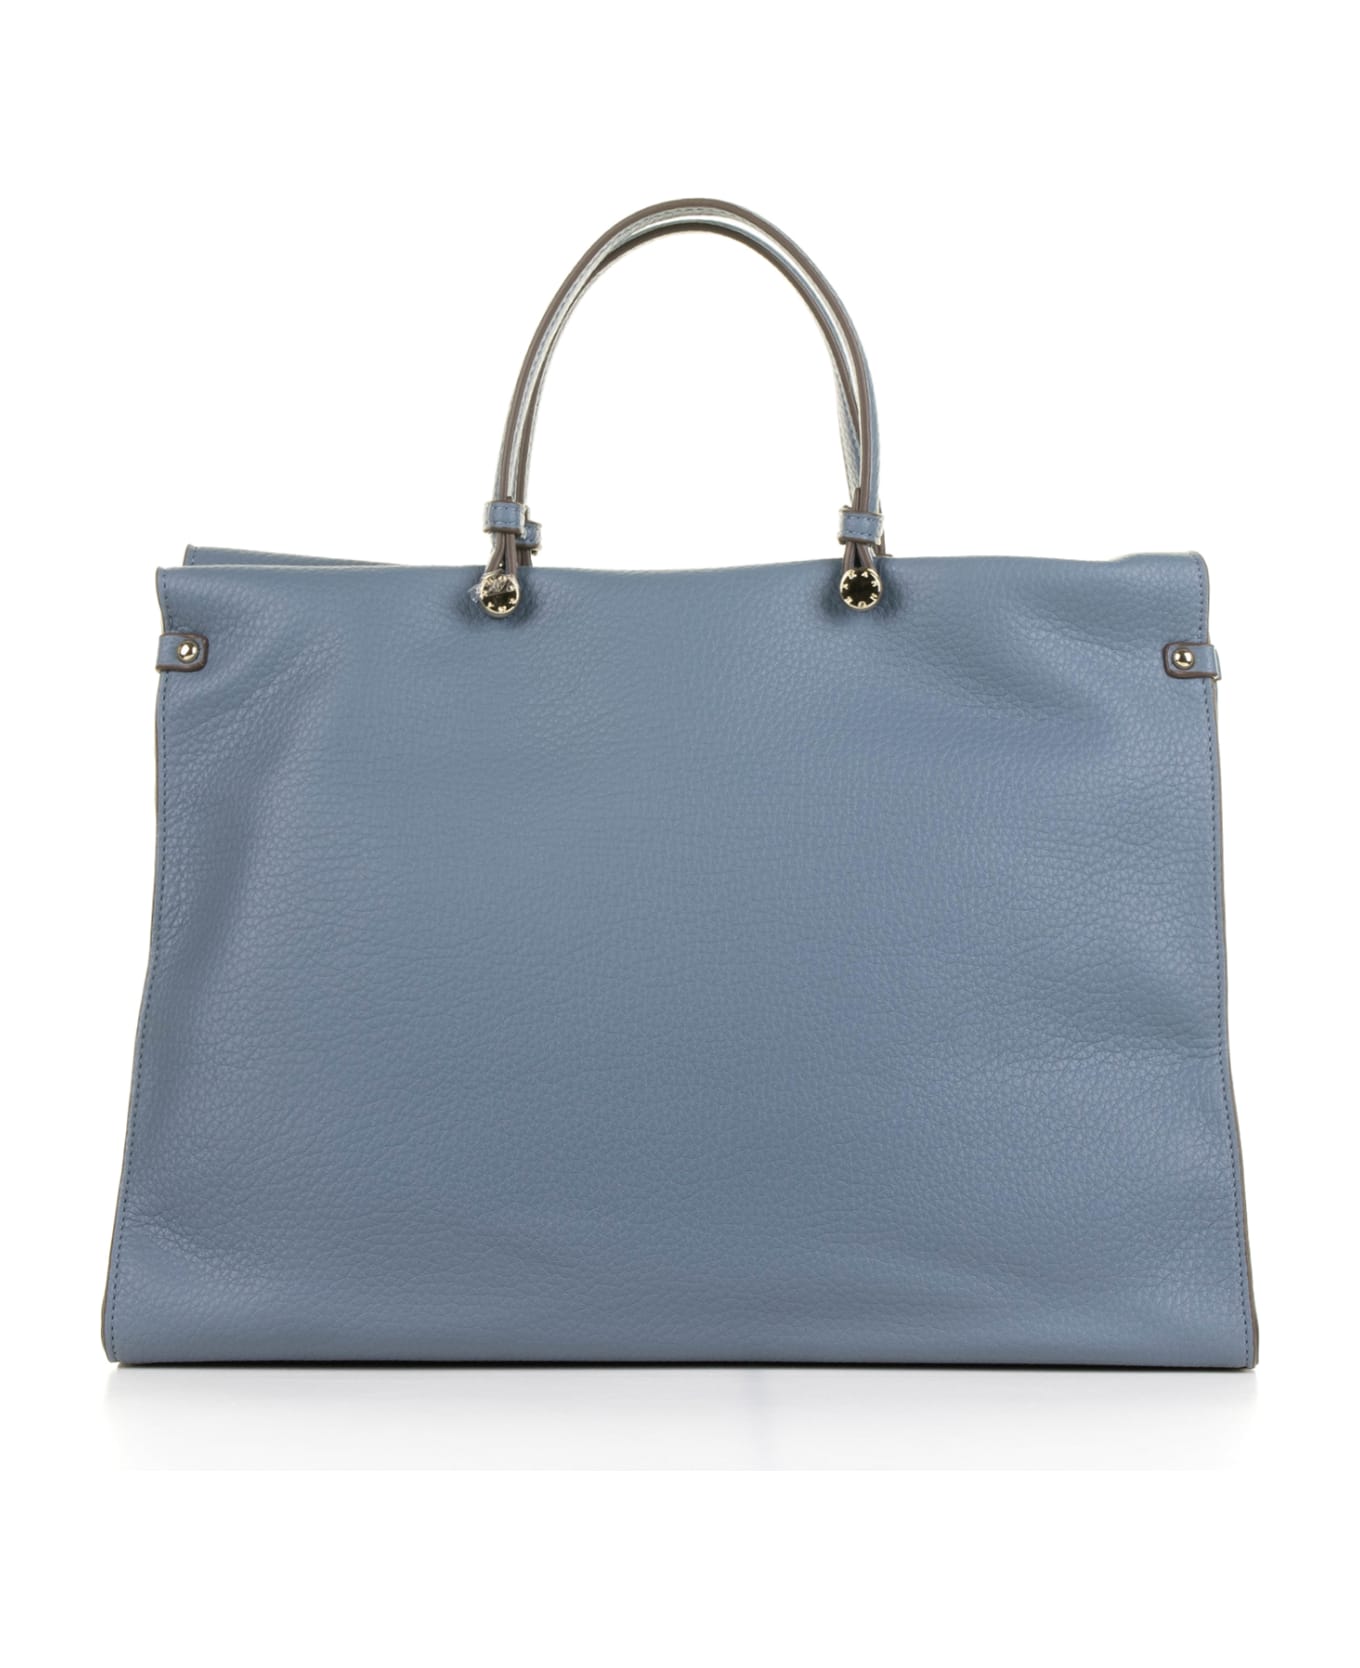 Ermanno Scervino Petra Light Blue Shopping Bag In Textured Eco-leather - AZZURRO